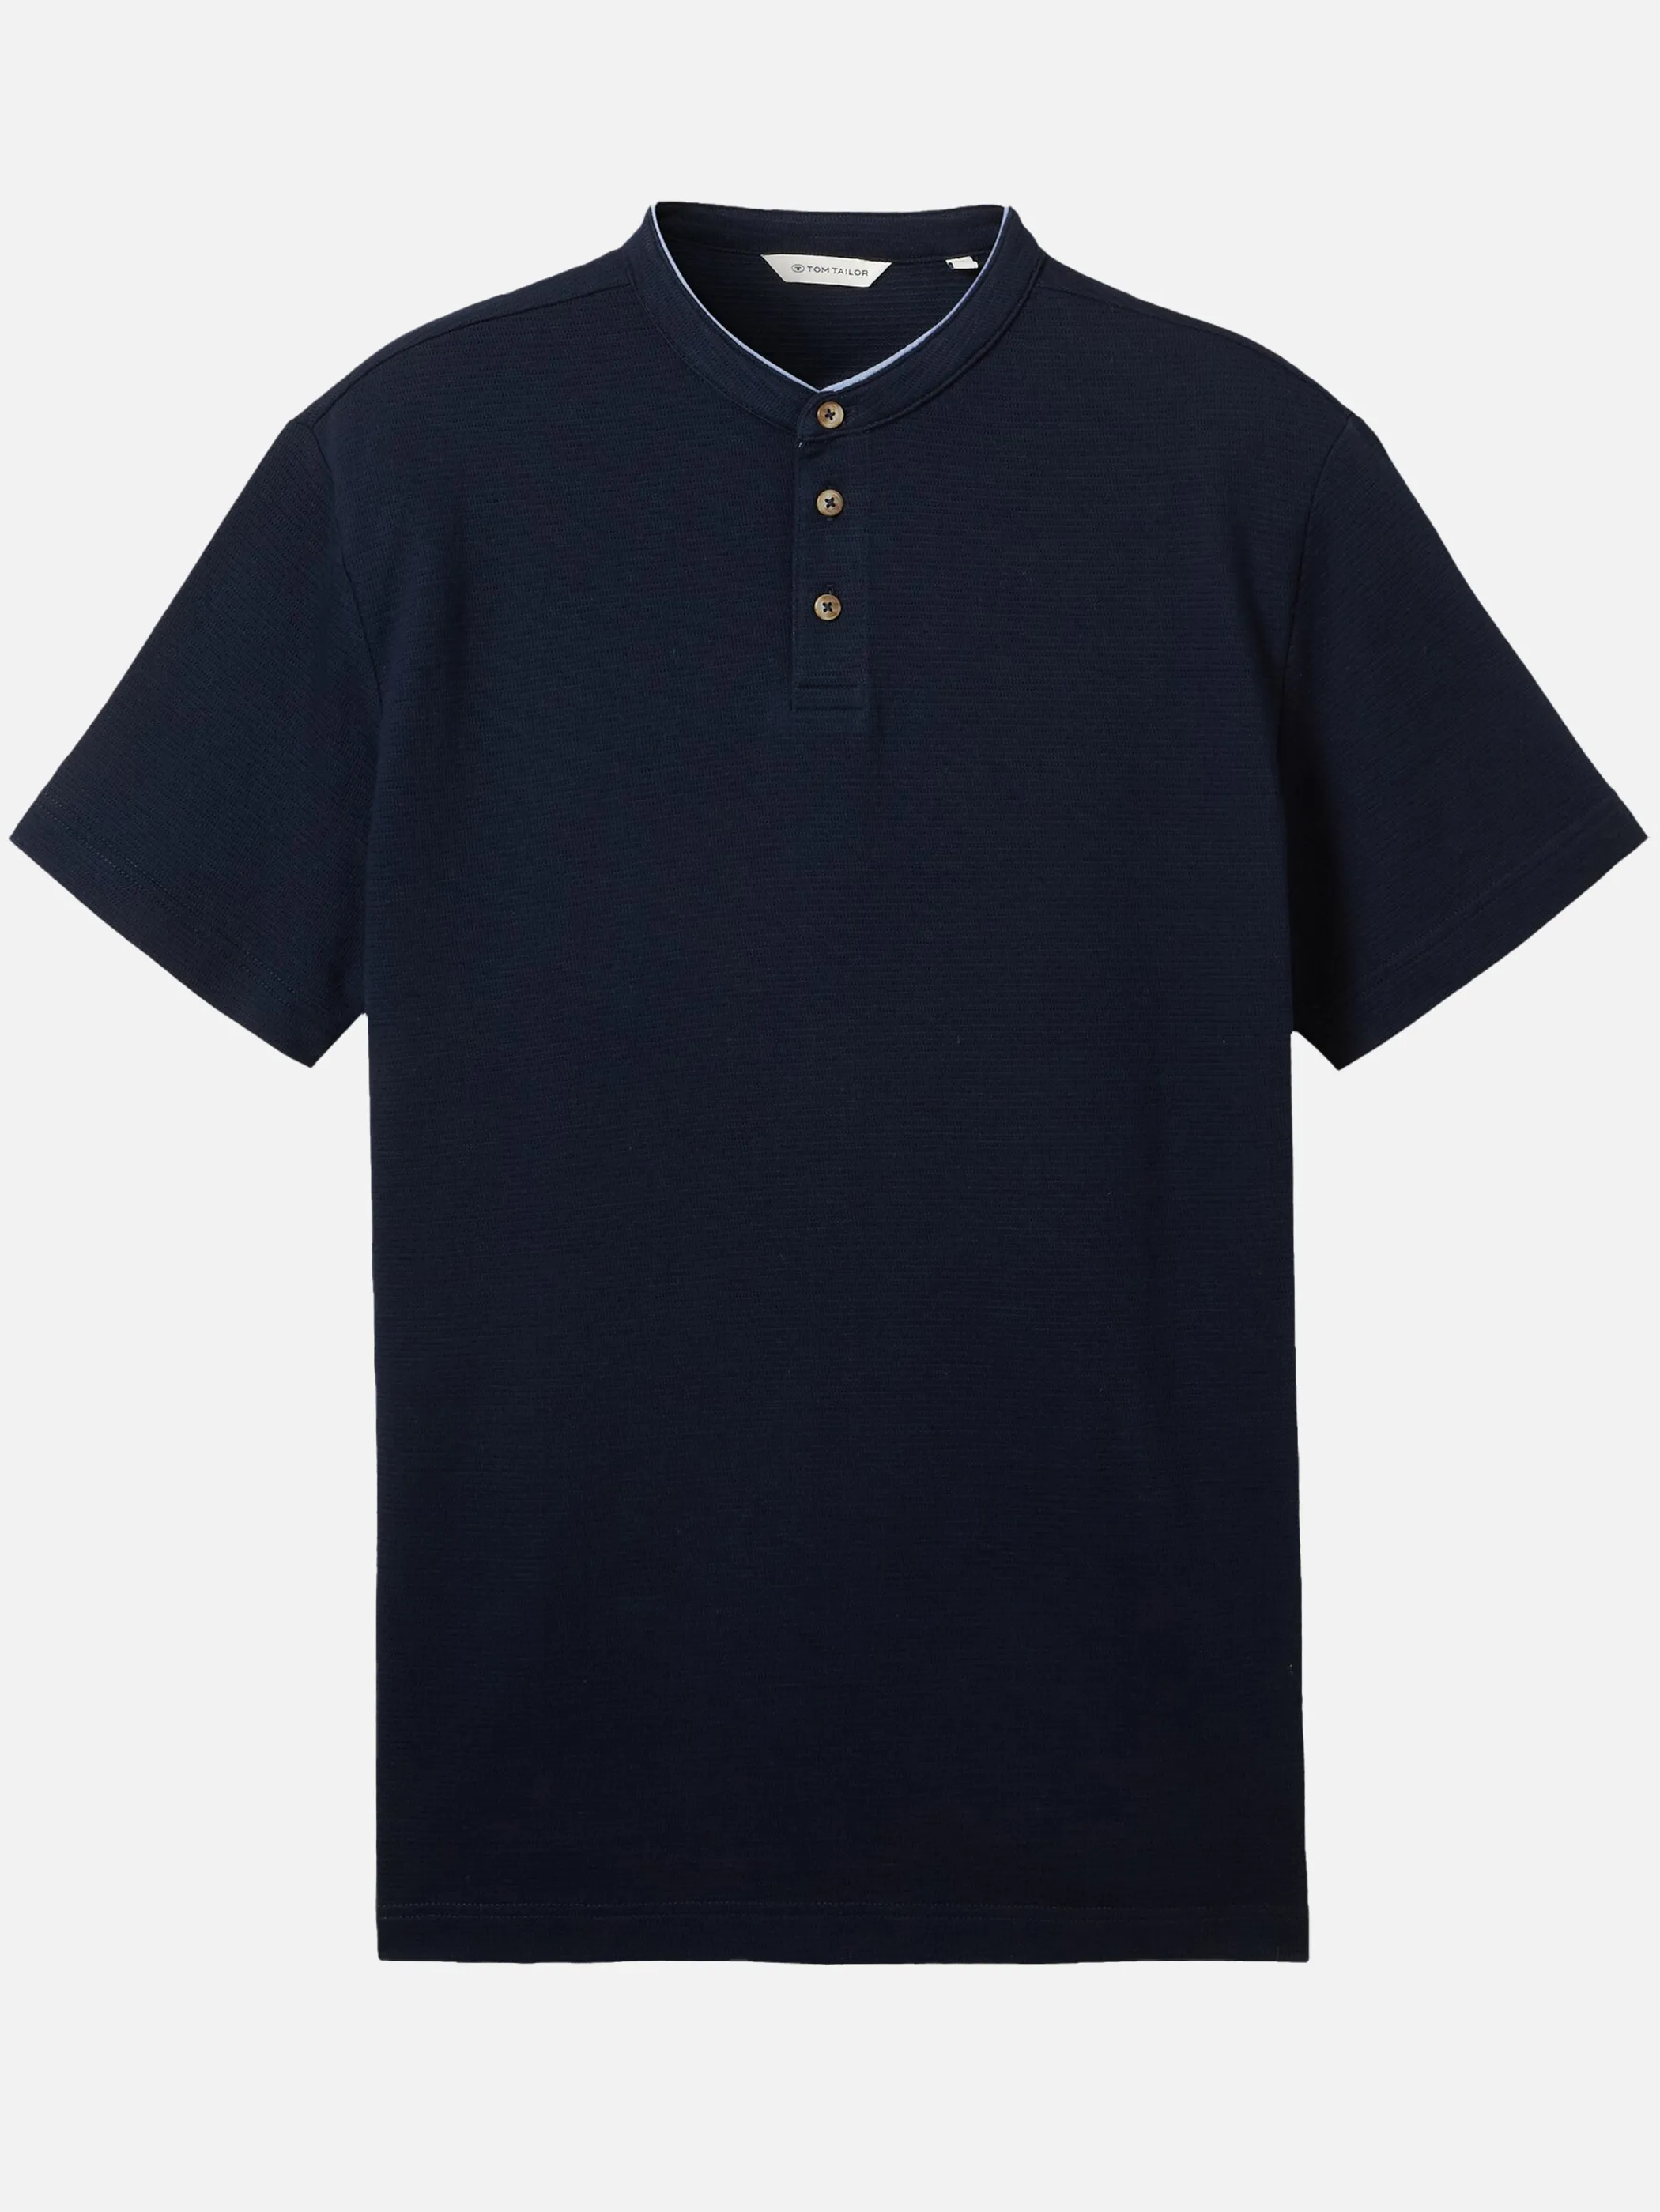 Tom Tailor 1041809 structured stand-up polo Blau 895687 10668 1